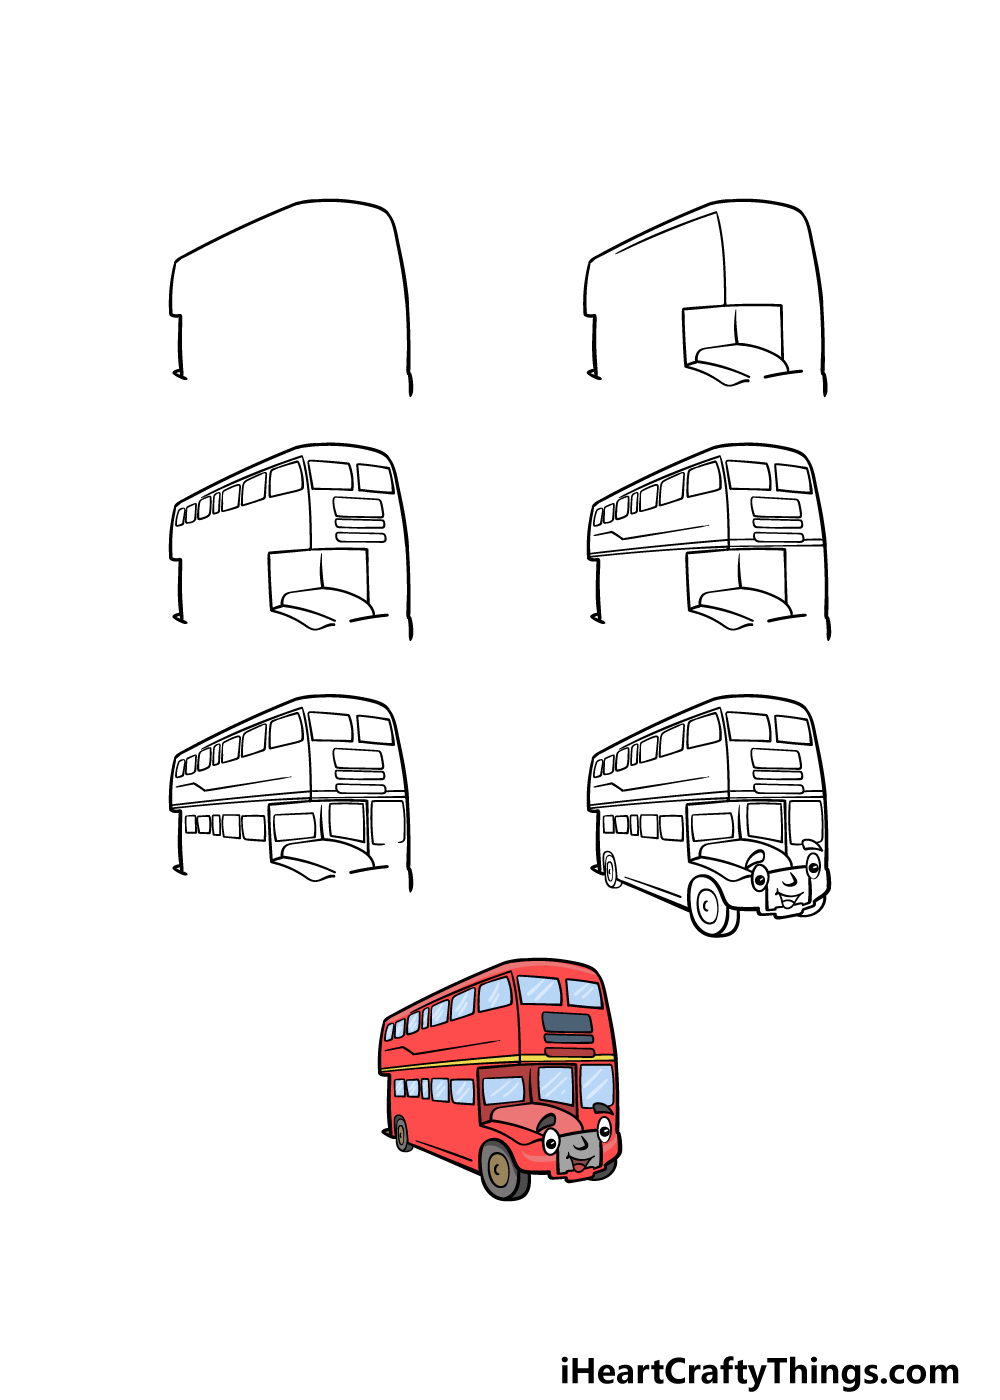 how to draw a cartoon bus in 7 steps